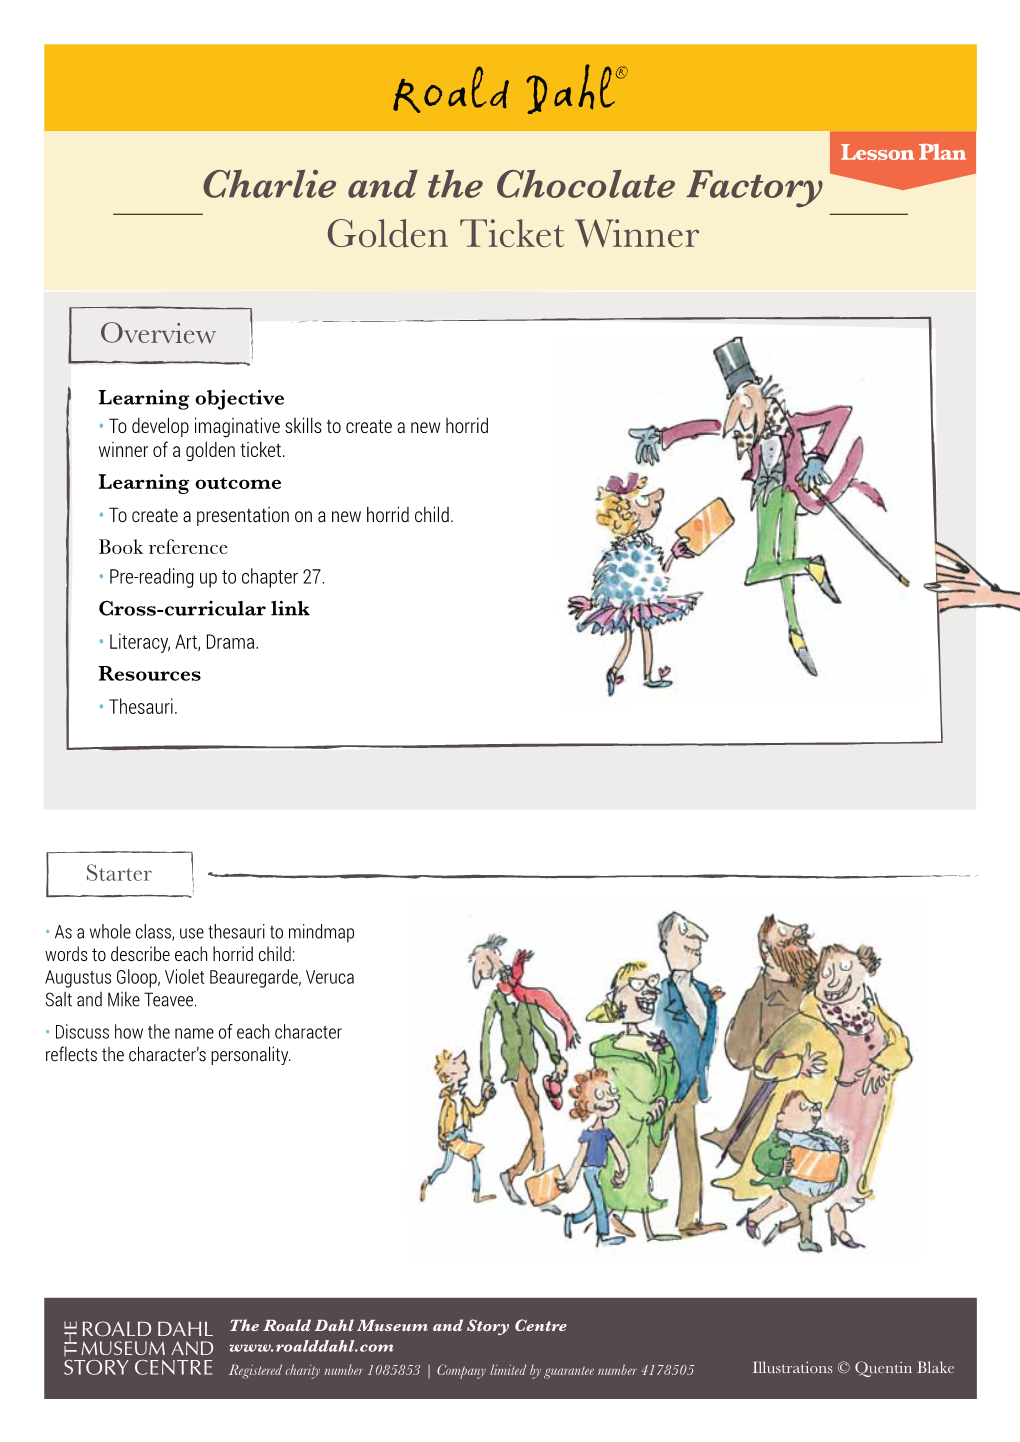 Charlie and the Chocolate Factory Golden Ticket Winner